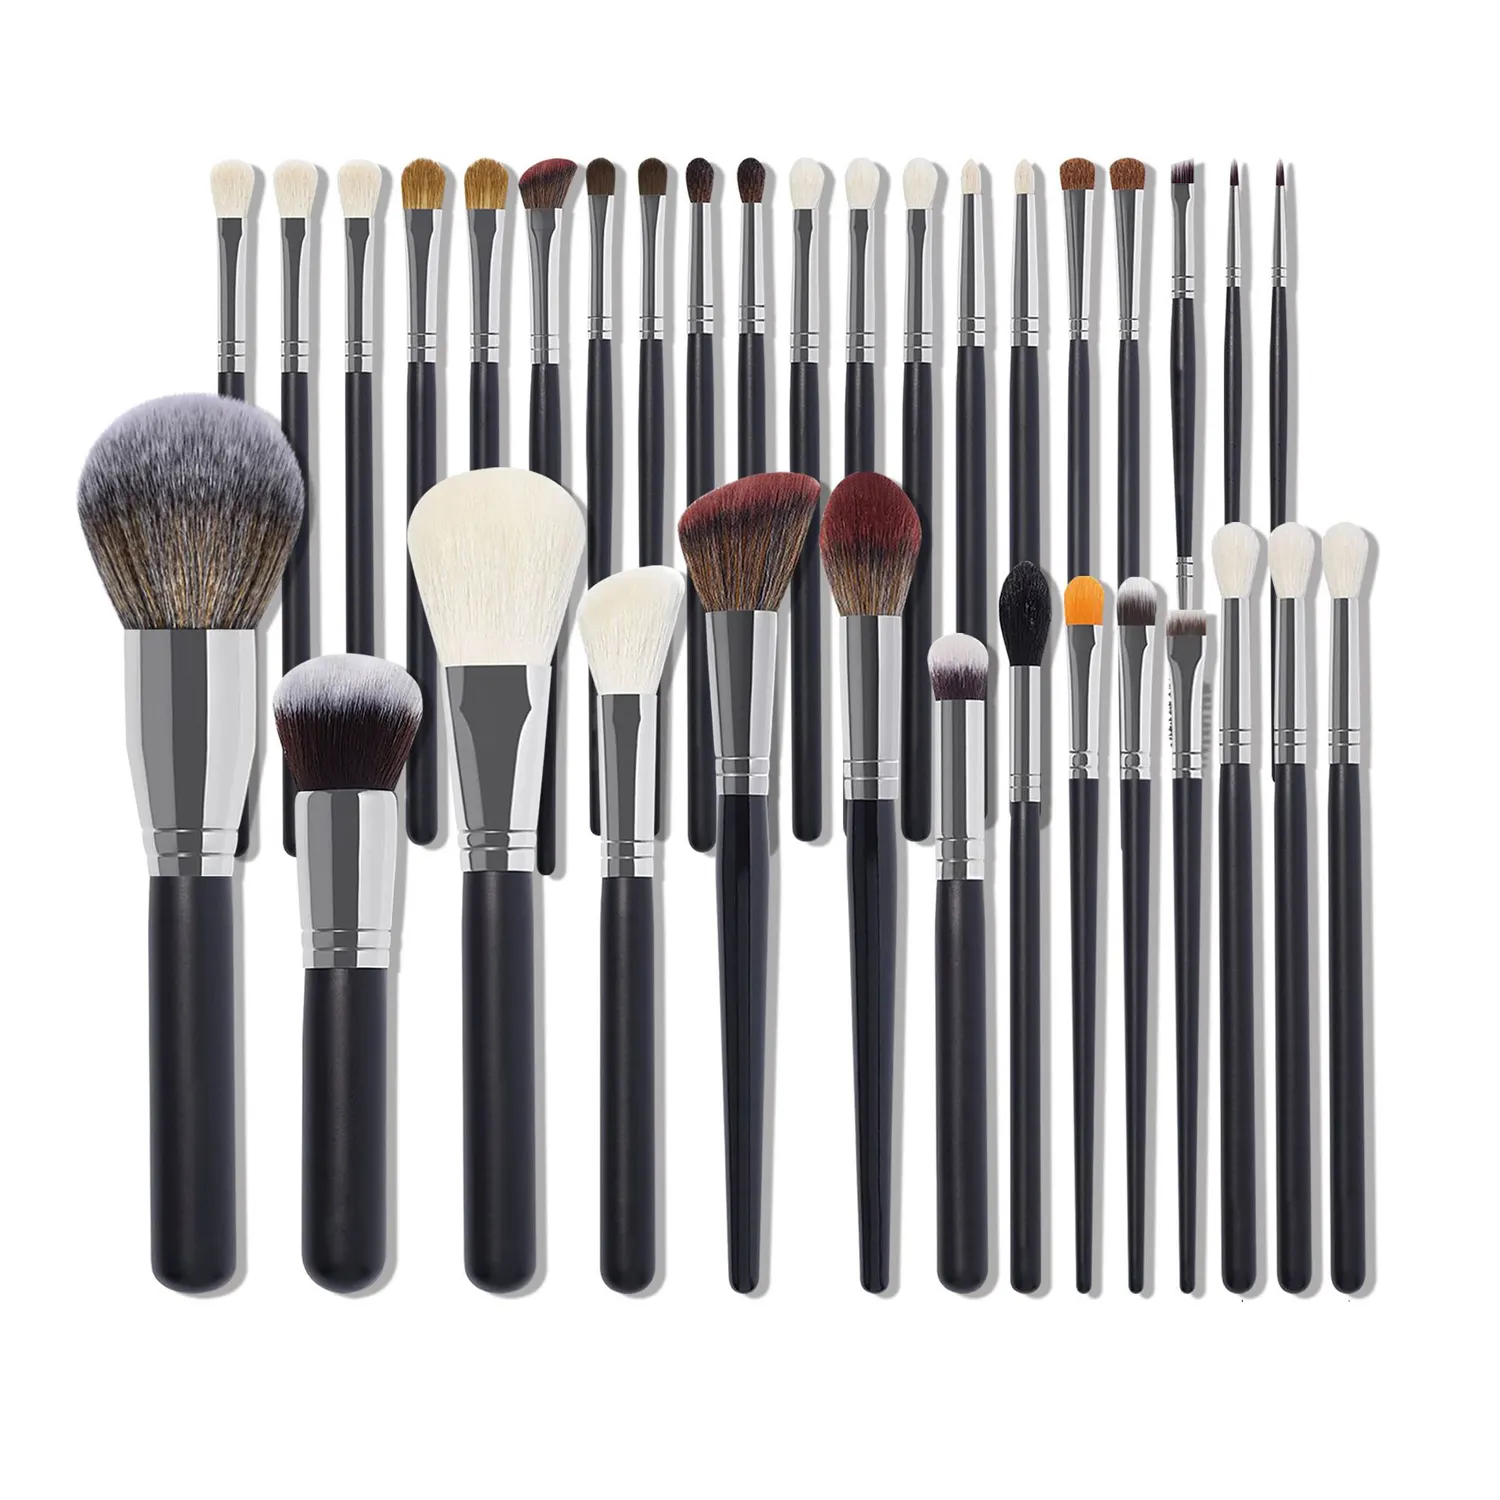 Luxury Professional 34PCS Black Makeup Brushes Custom Logo Set With Private Label Goat Hair Nature Hair Wood Handle With Bag